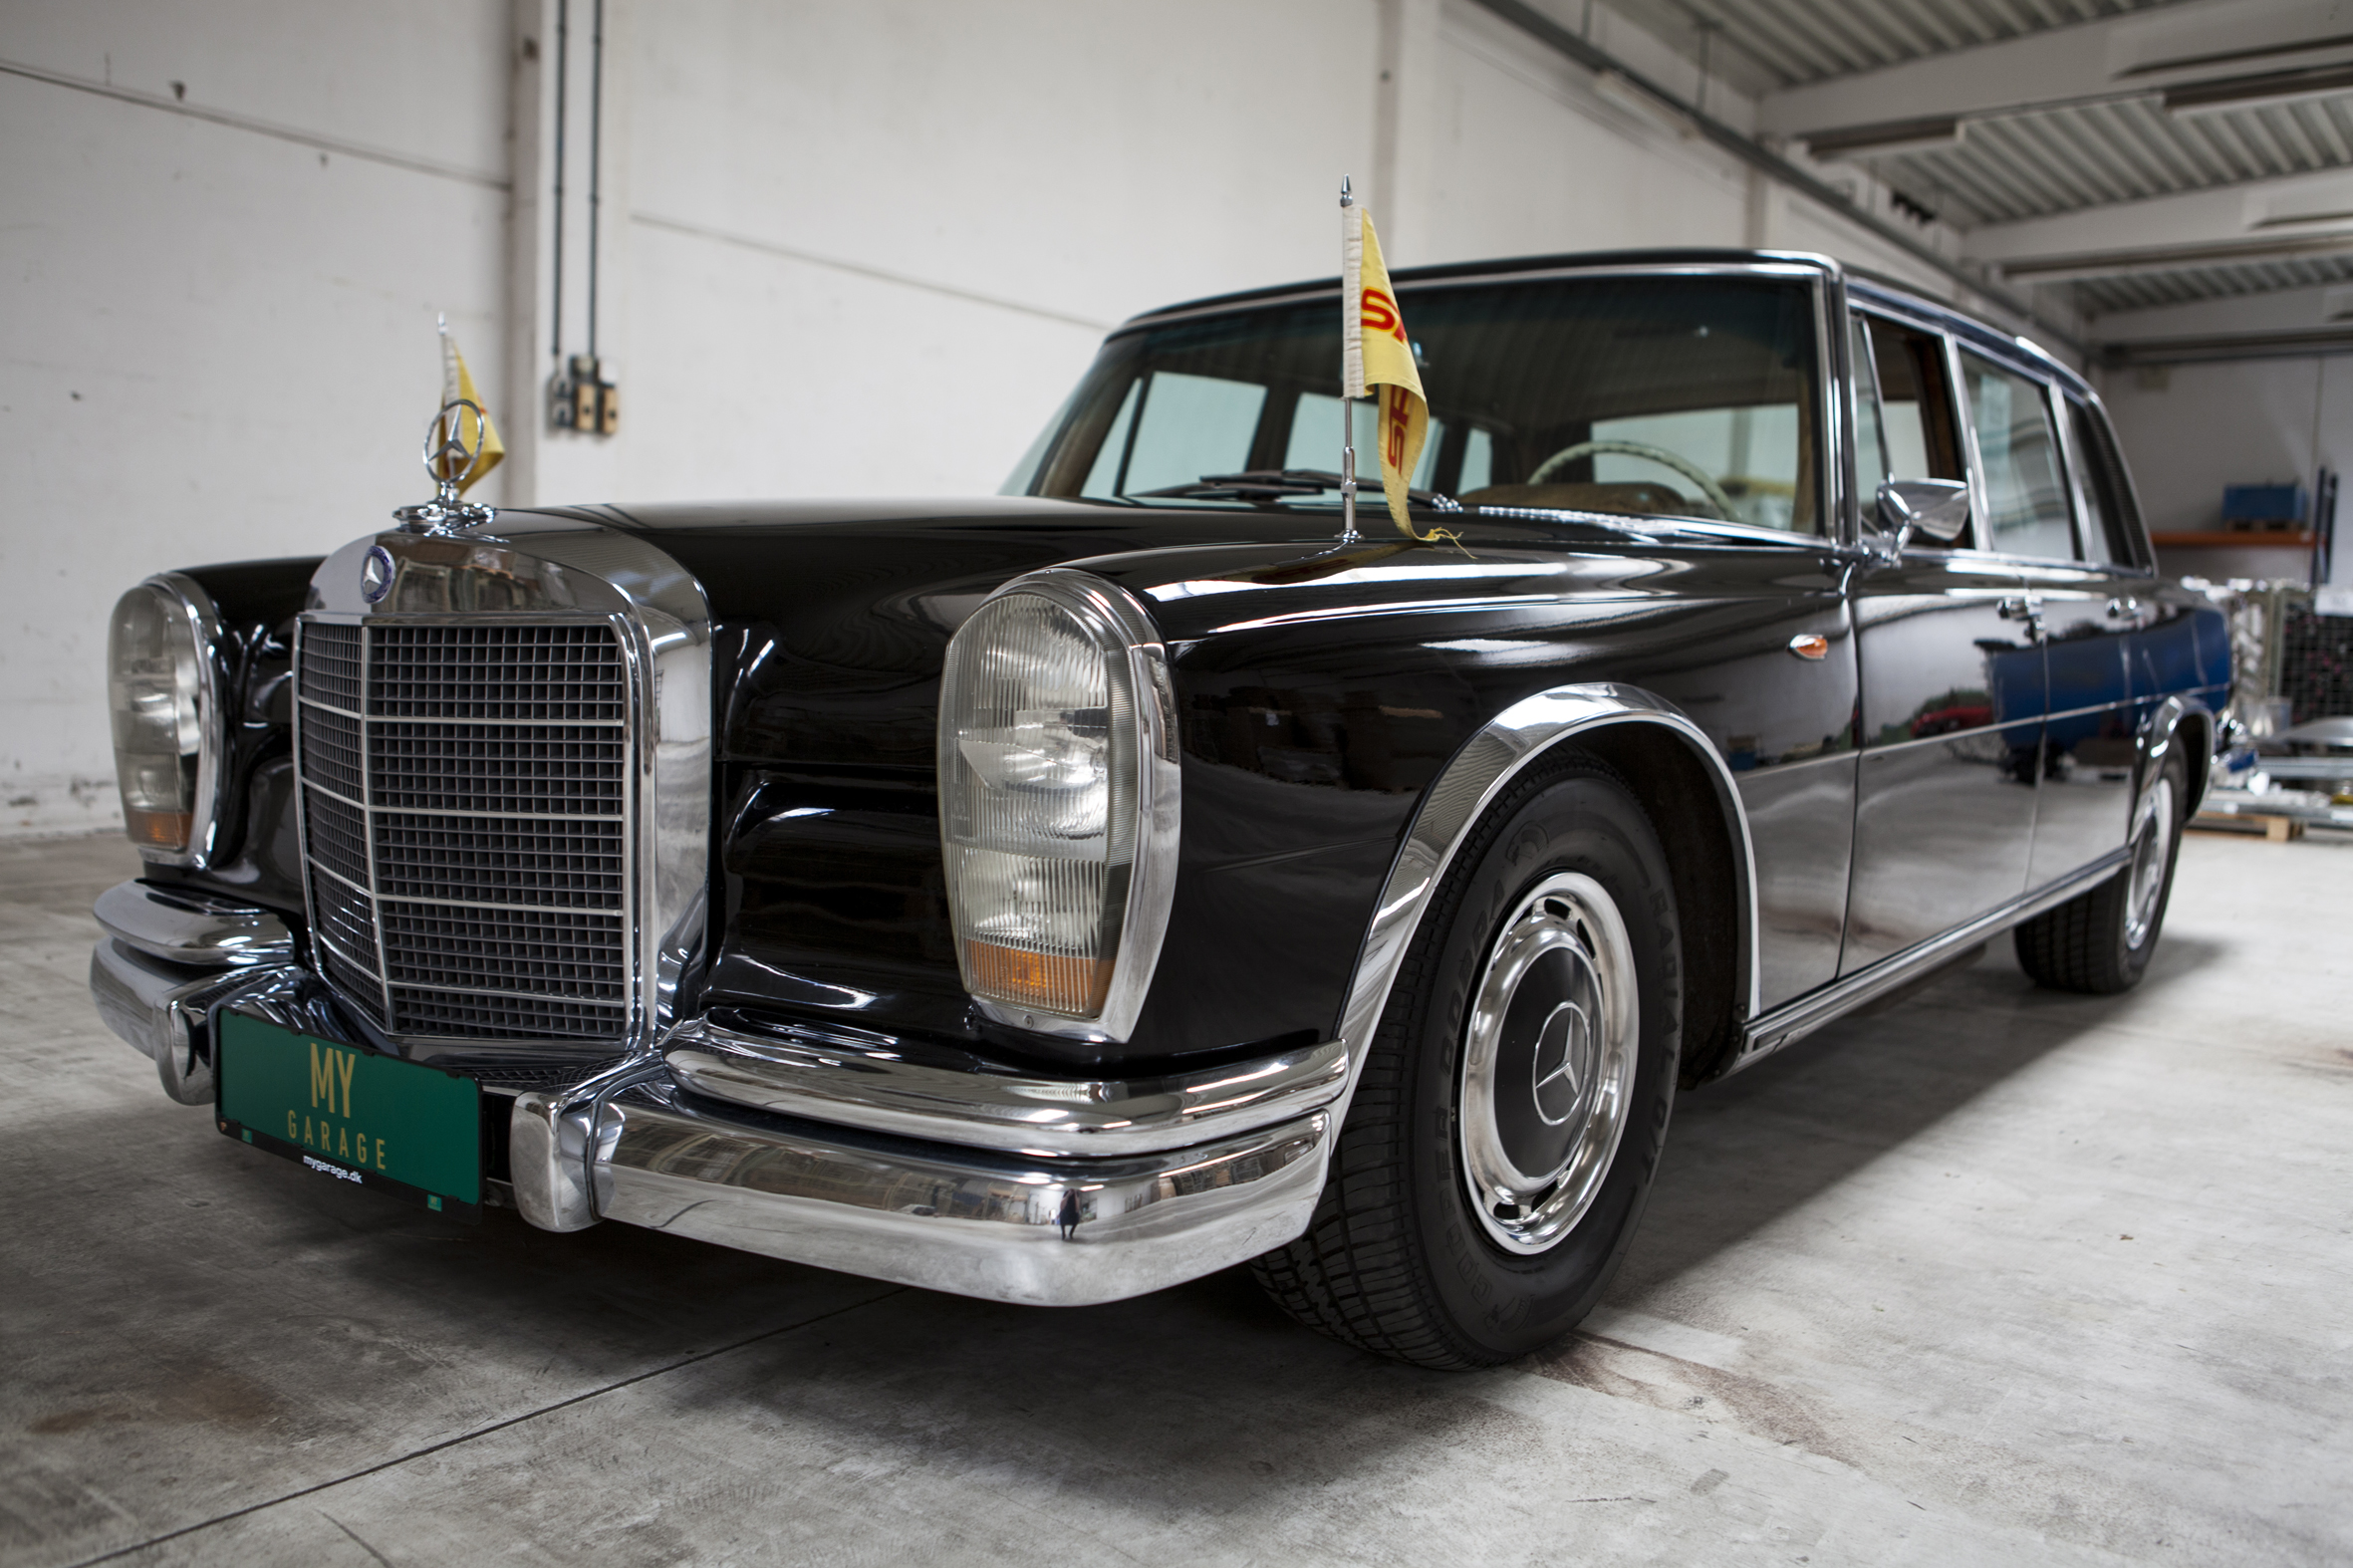 A 1964 Mercedes 600, formally owned by travel tycoon and one of the wealthiest men in Denmark, Simon Spies, sold for €140,630, more than €20,000 over its lower estimate.